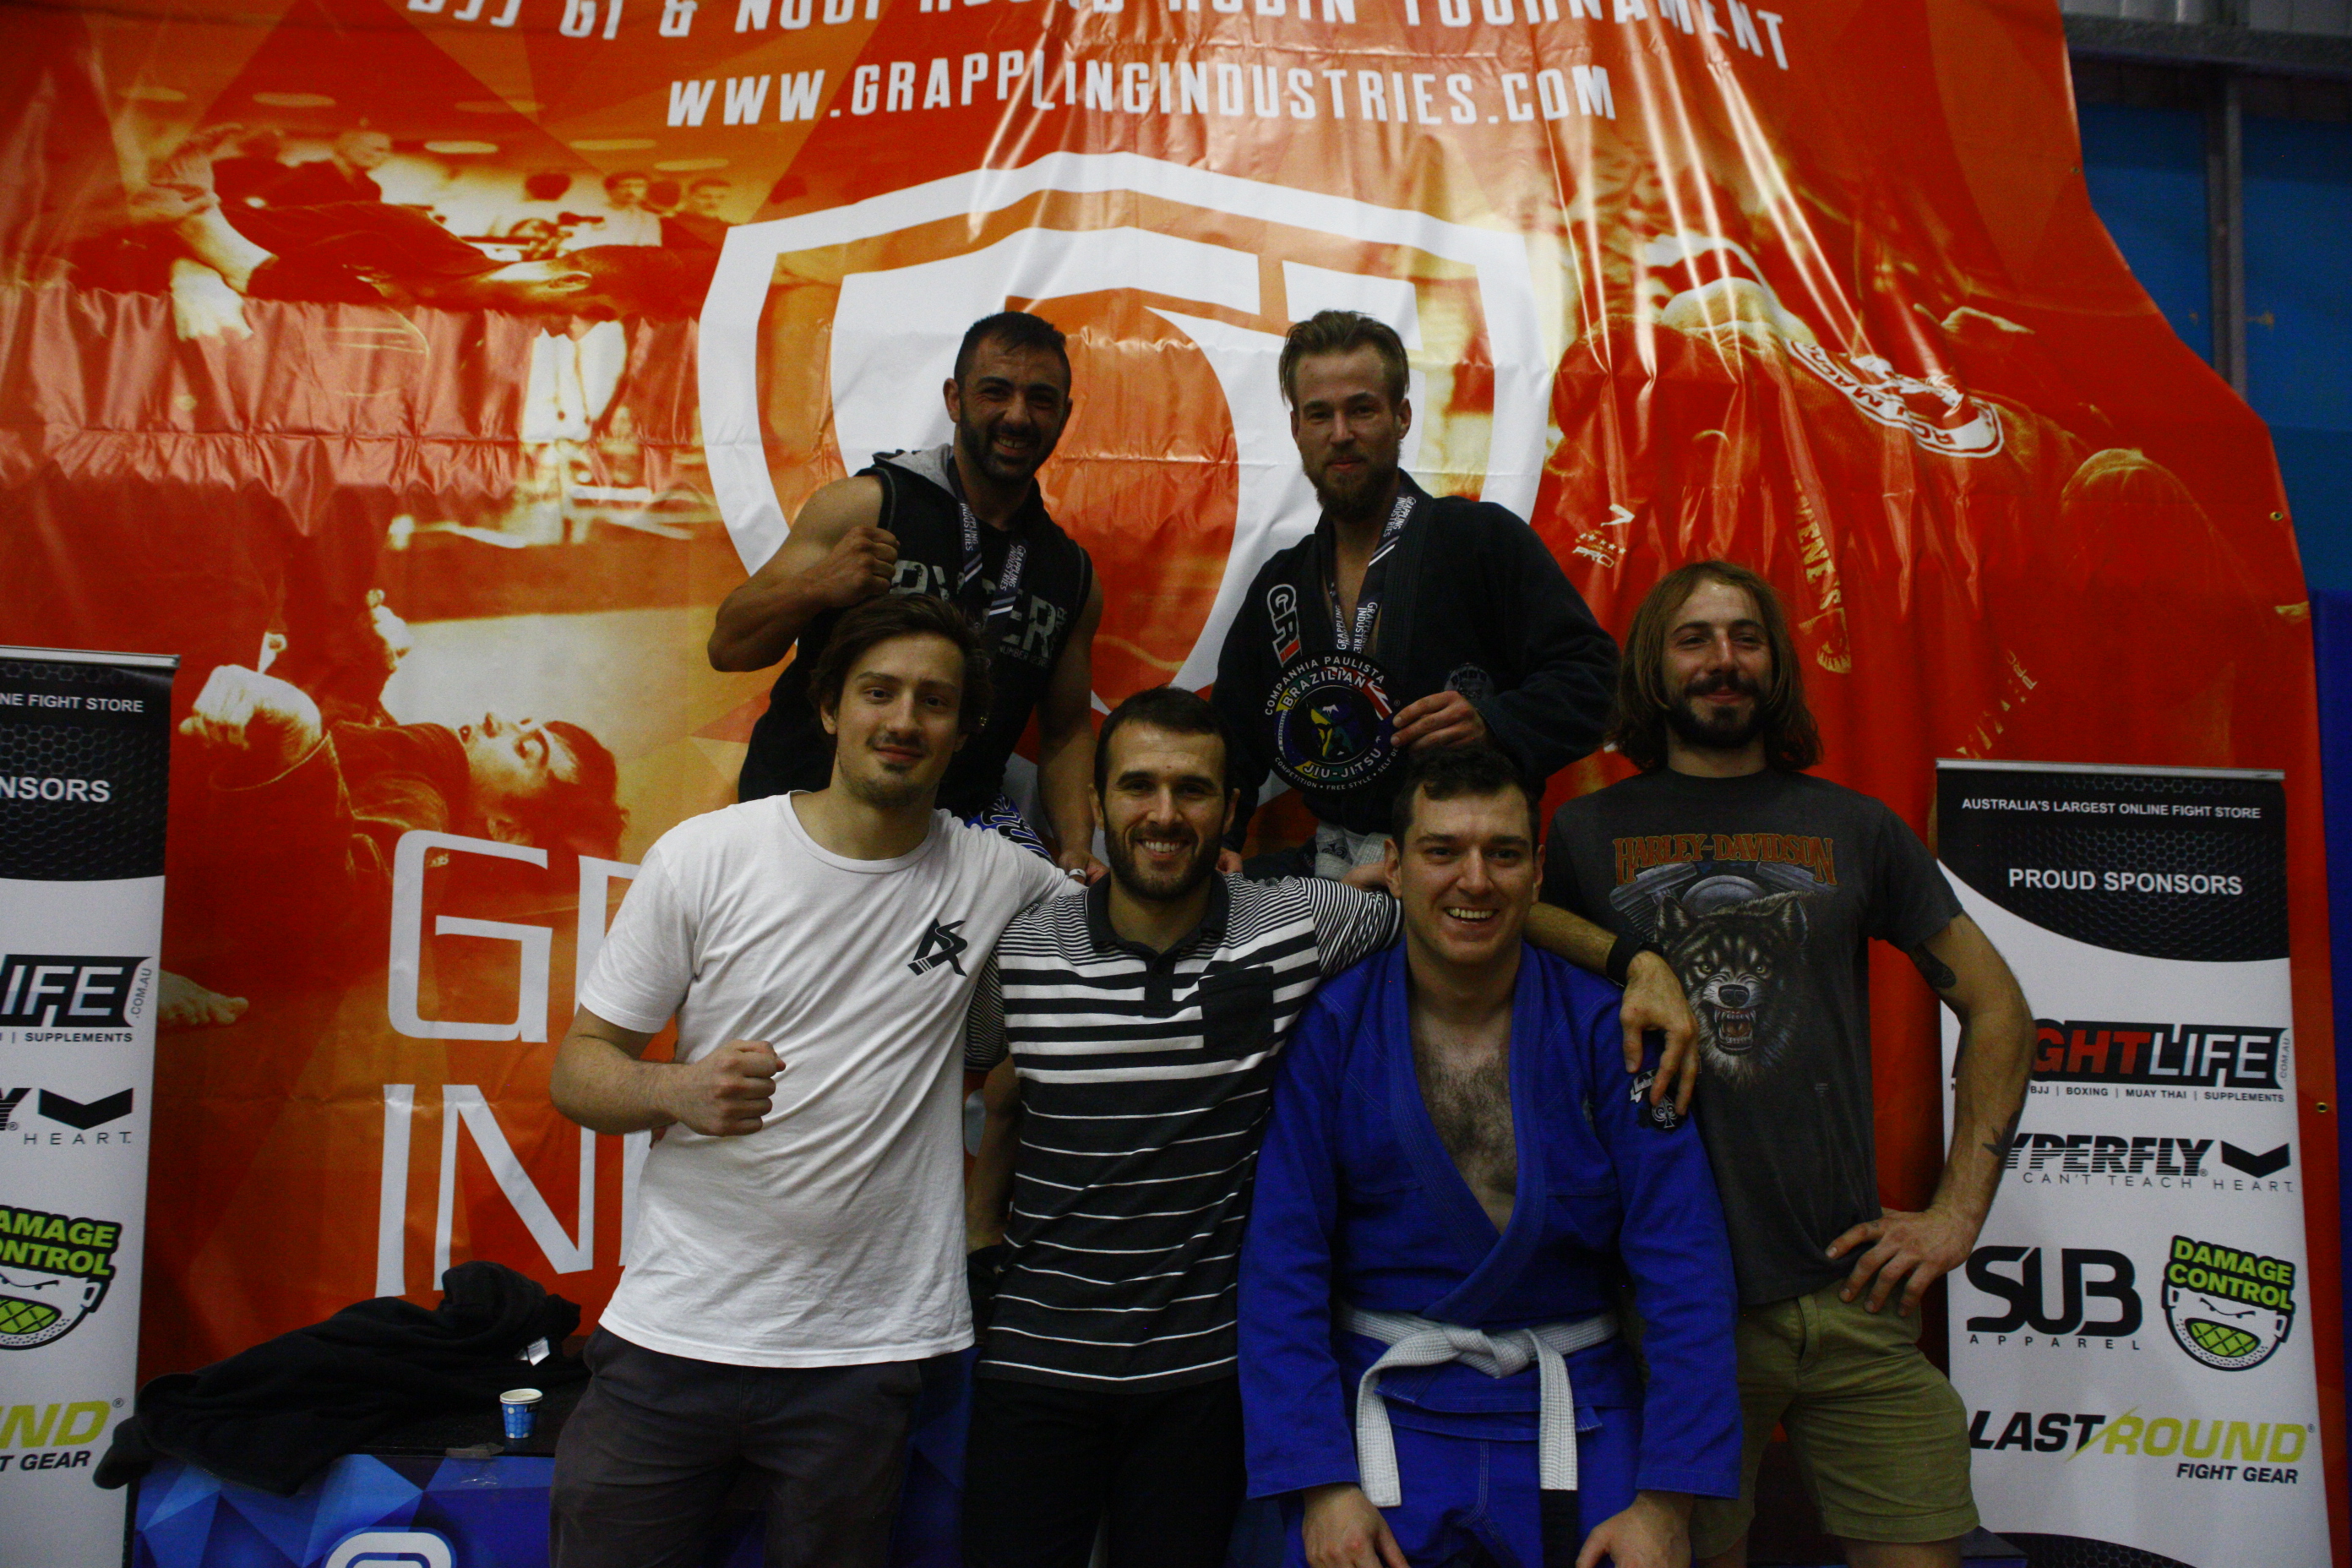 Coach Marcel Leteri Sasso de Oliveira and his DMD'S MMA competition team at the 2017 Grappling Industries in Melbourne.